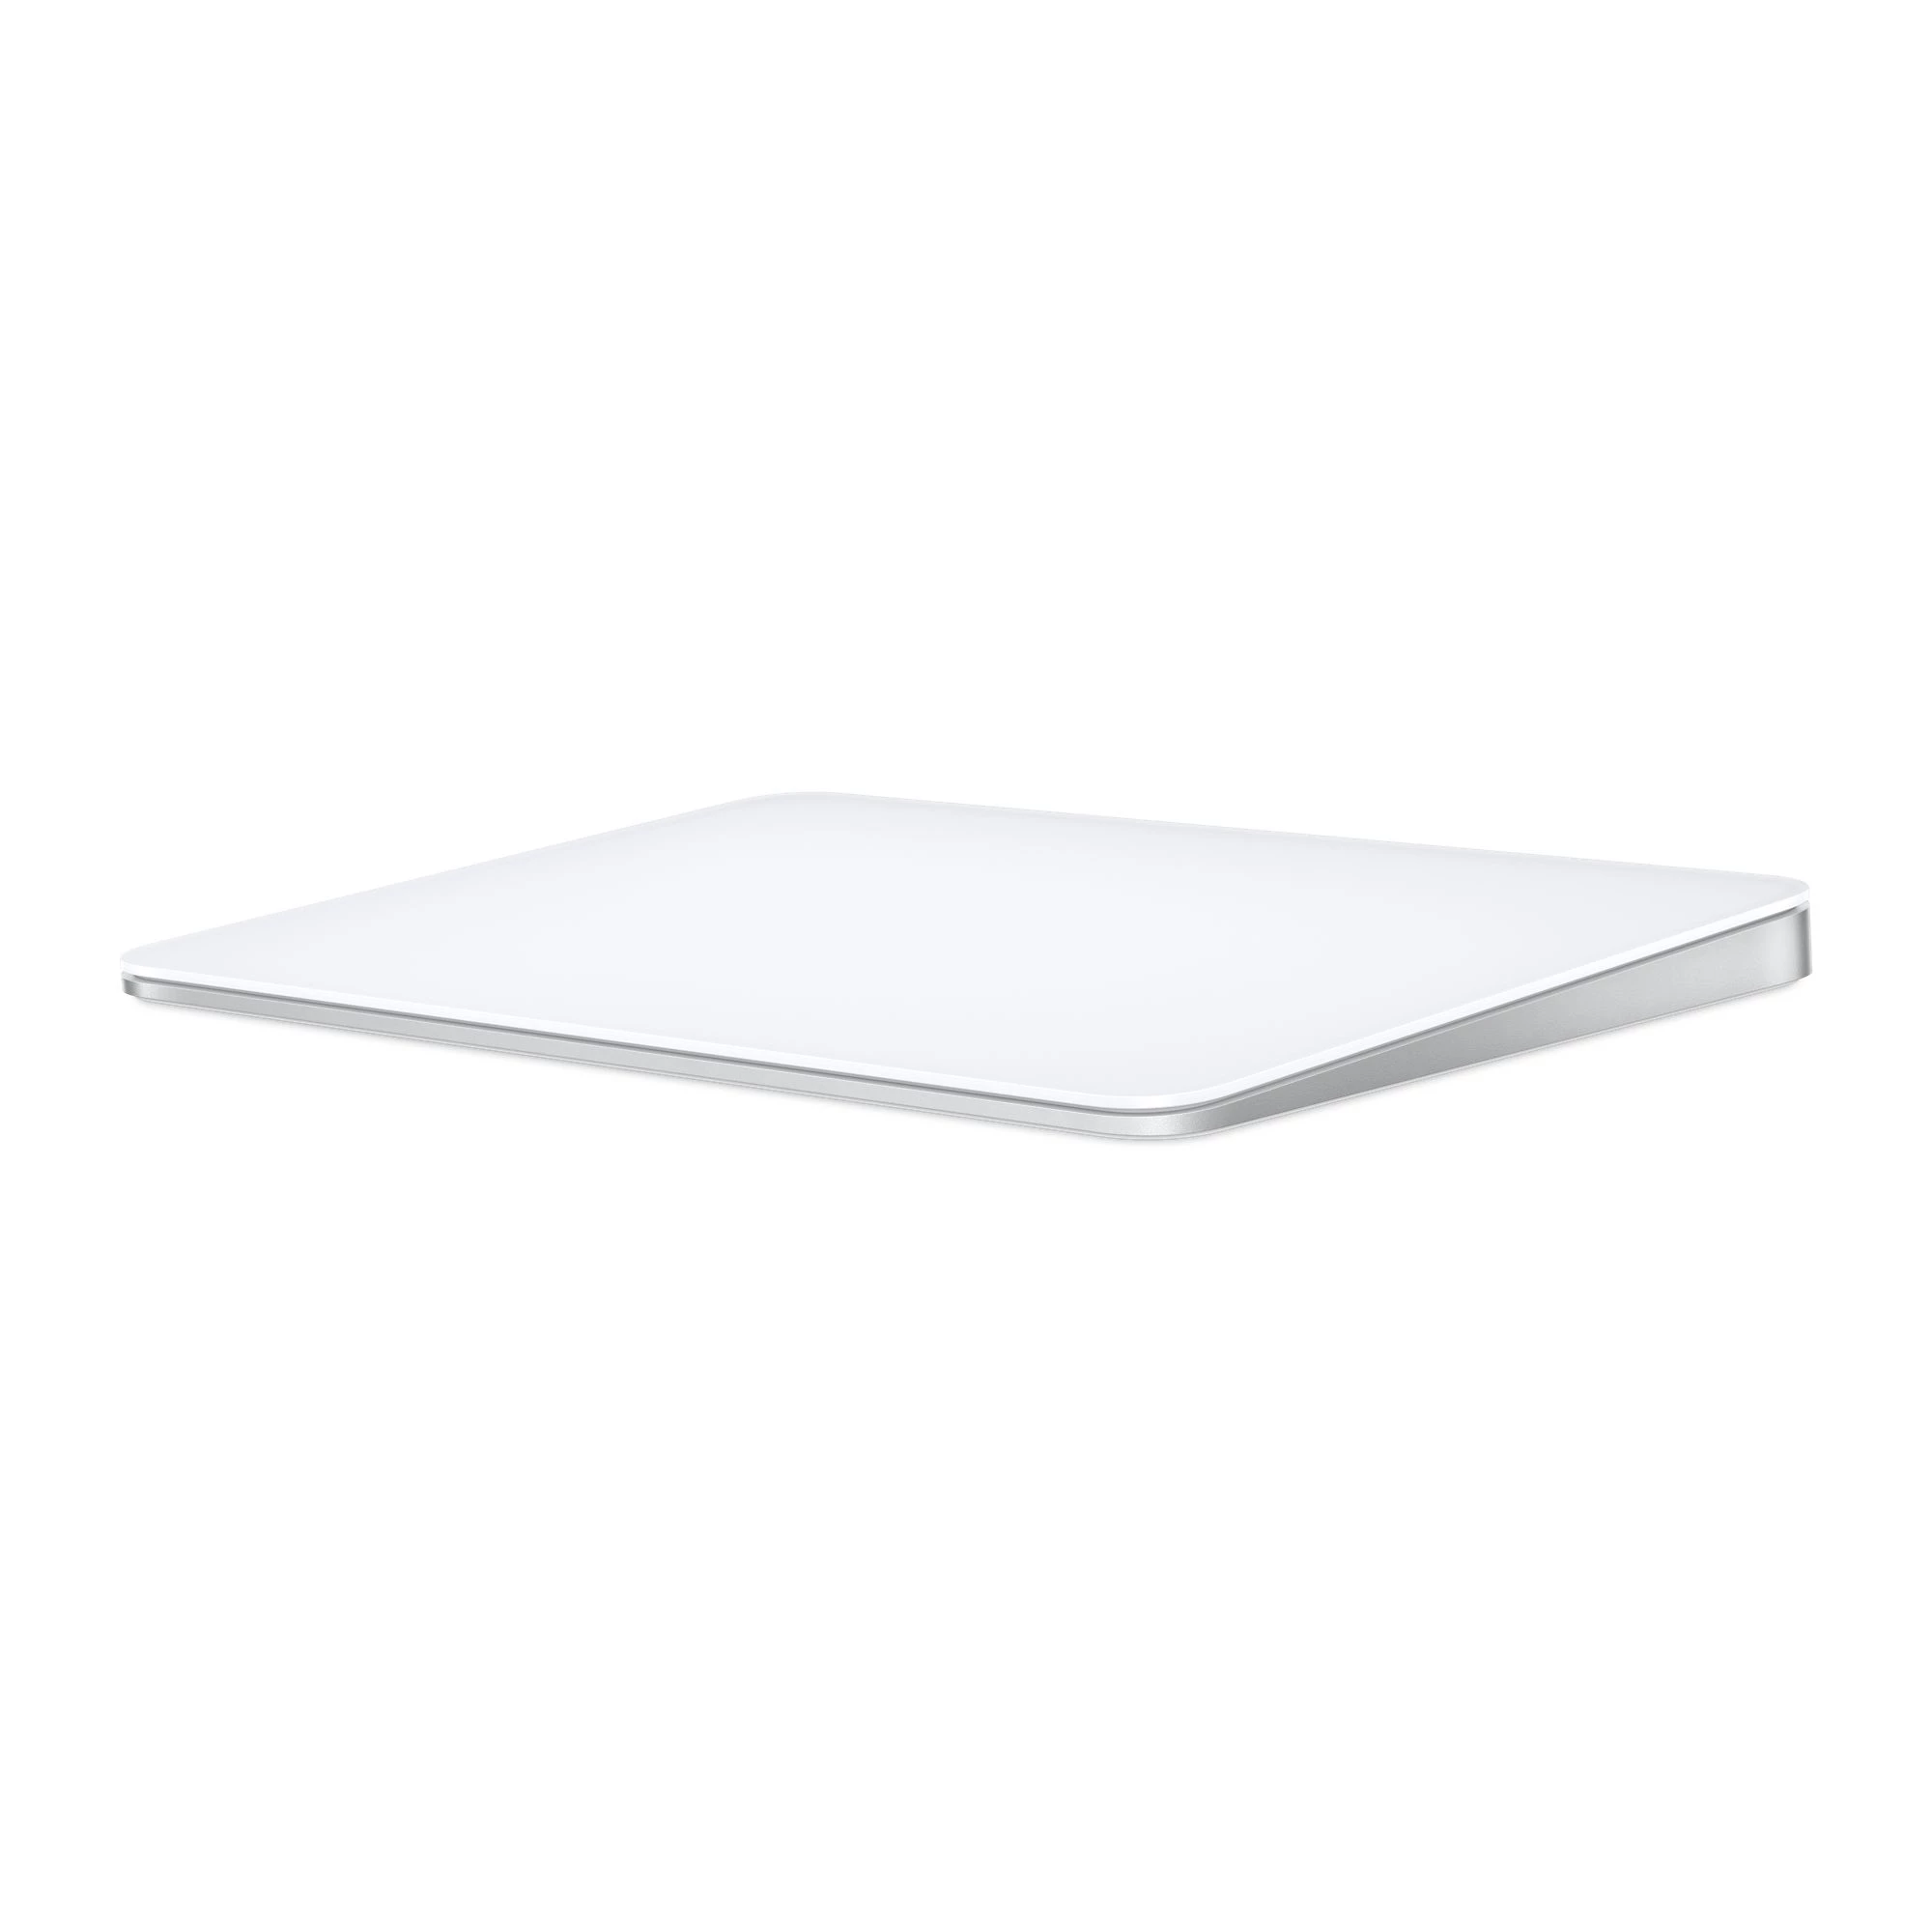 Apple Magic Trackpad 2021 - White Multi-Touch Surface (MK2D3)